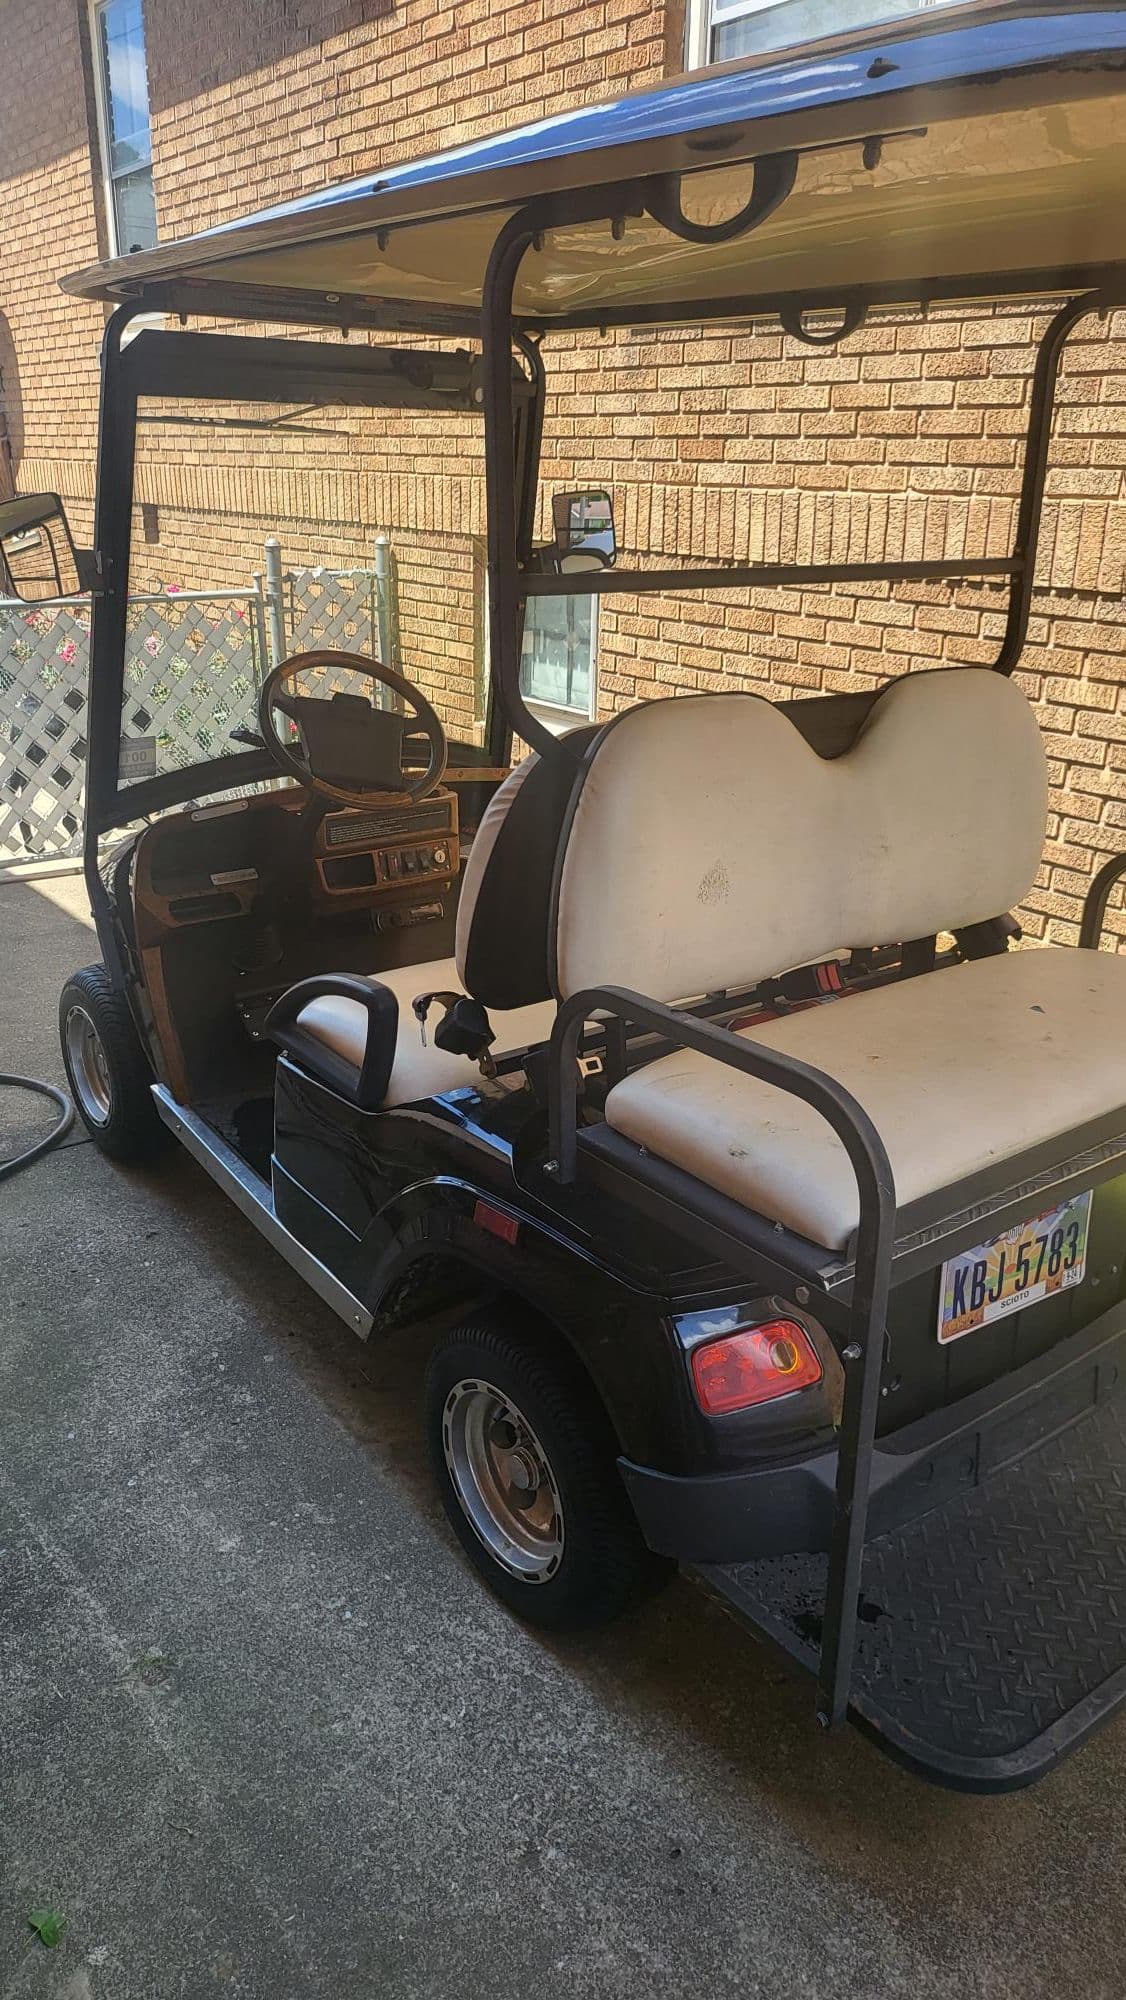 2009 Porsche 911 - 2009 Zone Electric Golf Cart price for quick sale - Used - Portsmouth, OH 45662, United States